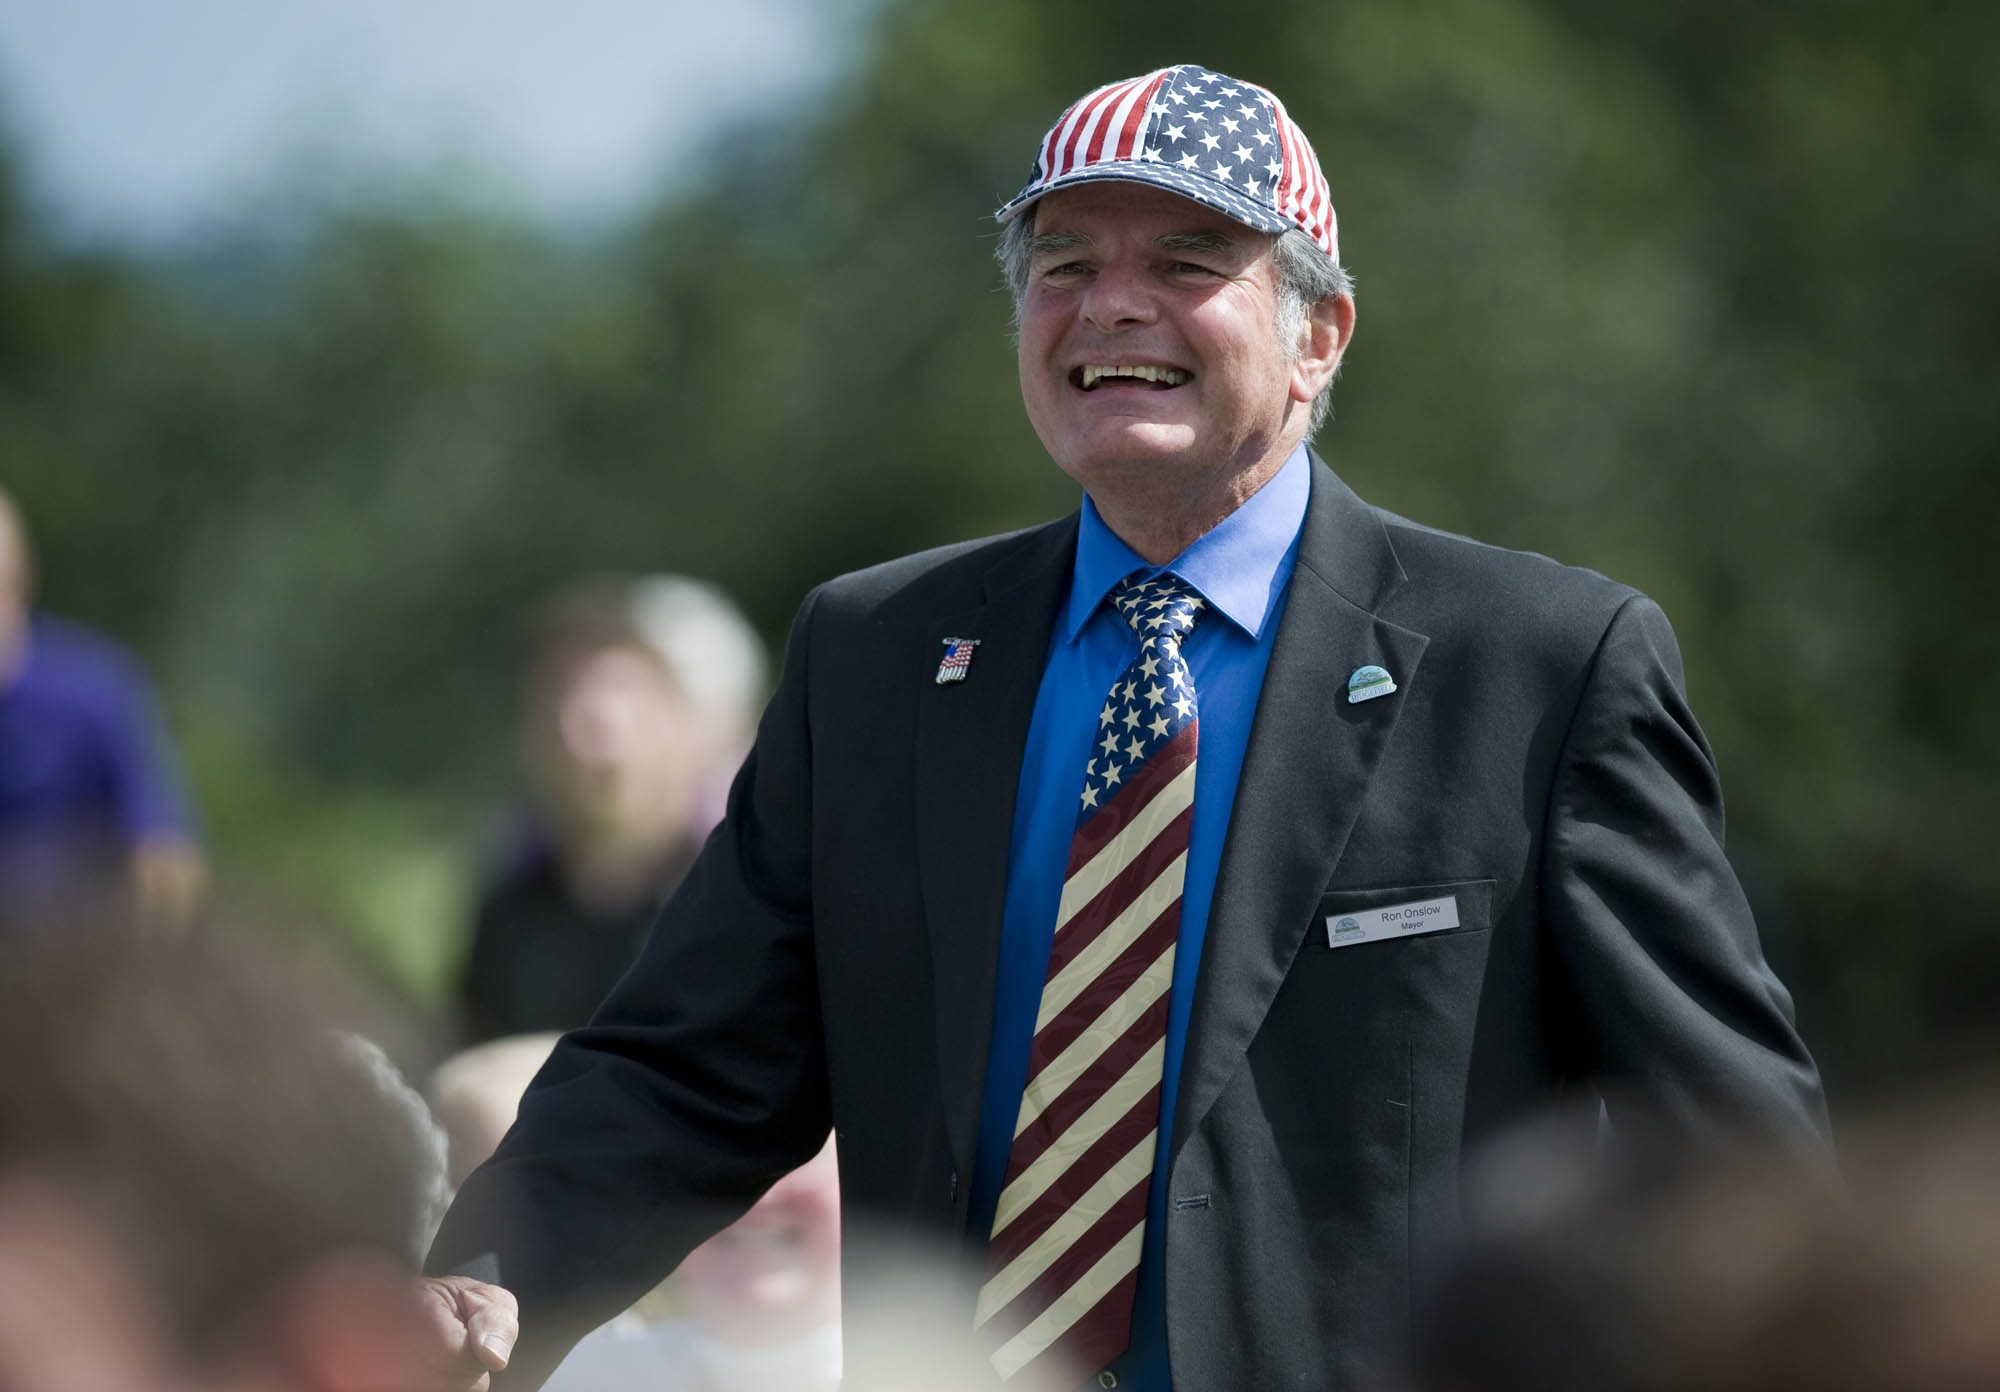 Ridgefield Mayor Ron Onslow competes in the patriotic tie contest during the Annual Flag Day observance on the parade grounds at the Vancouver Barracks on Monday June 14, 2010.